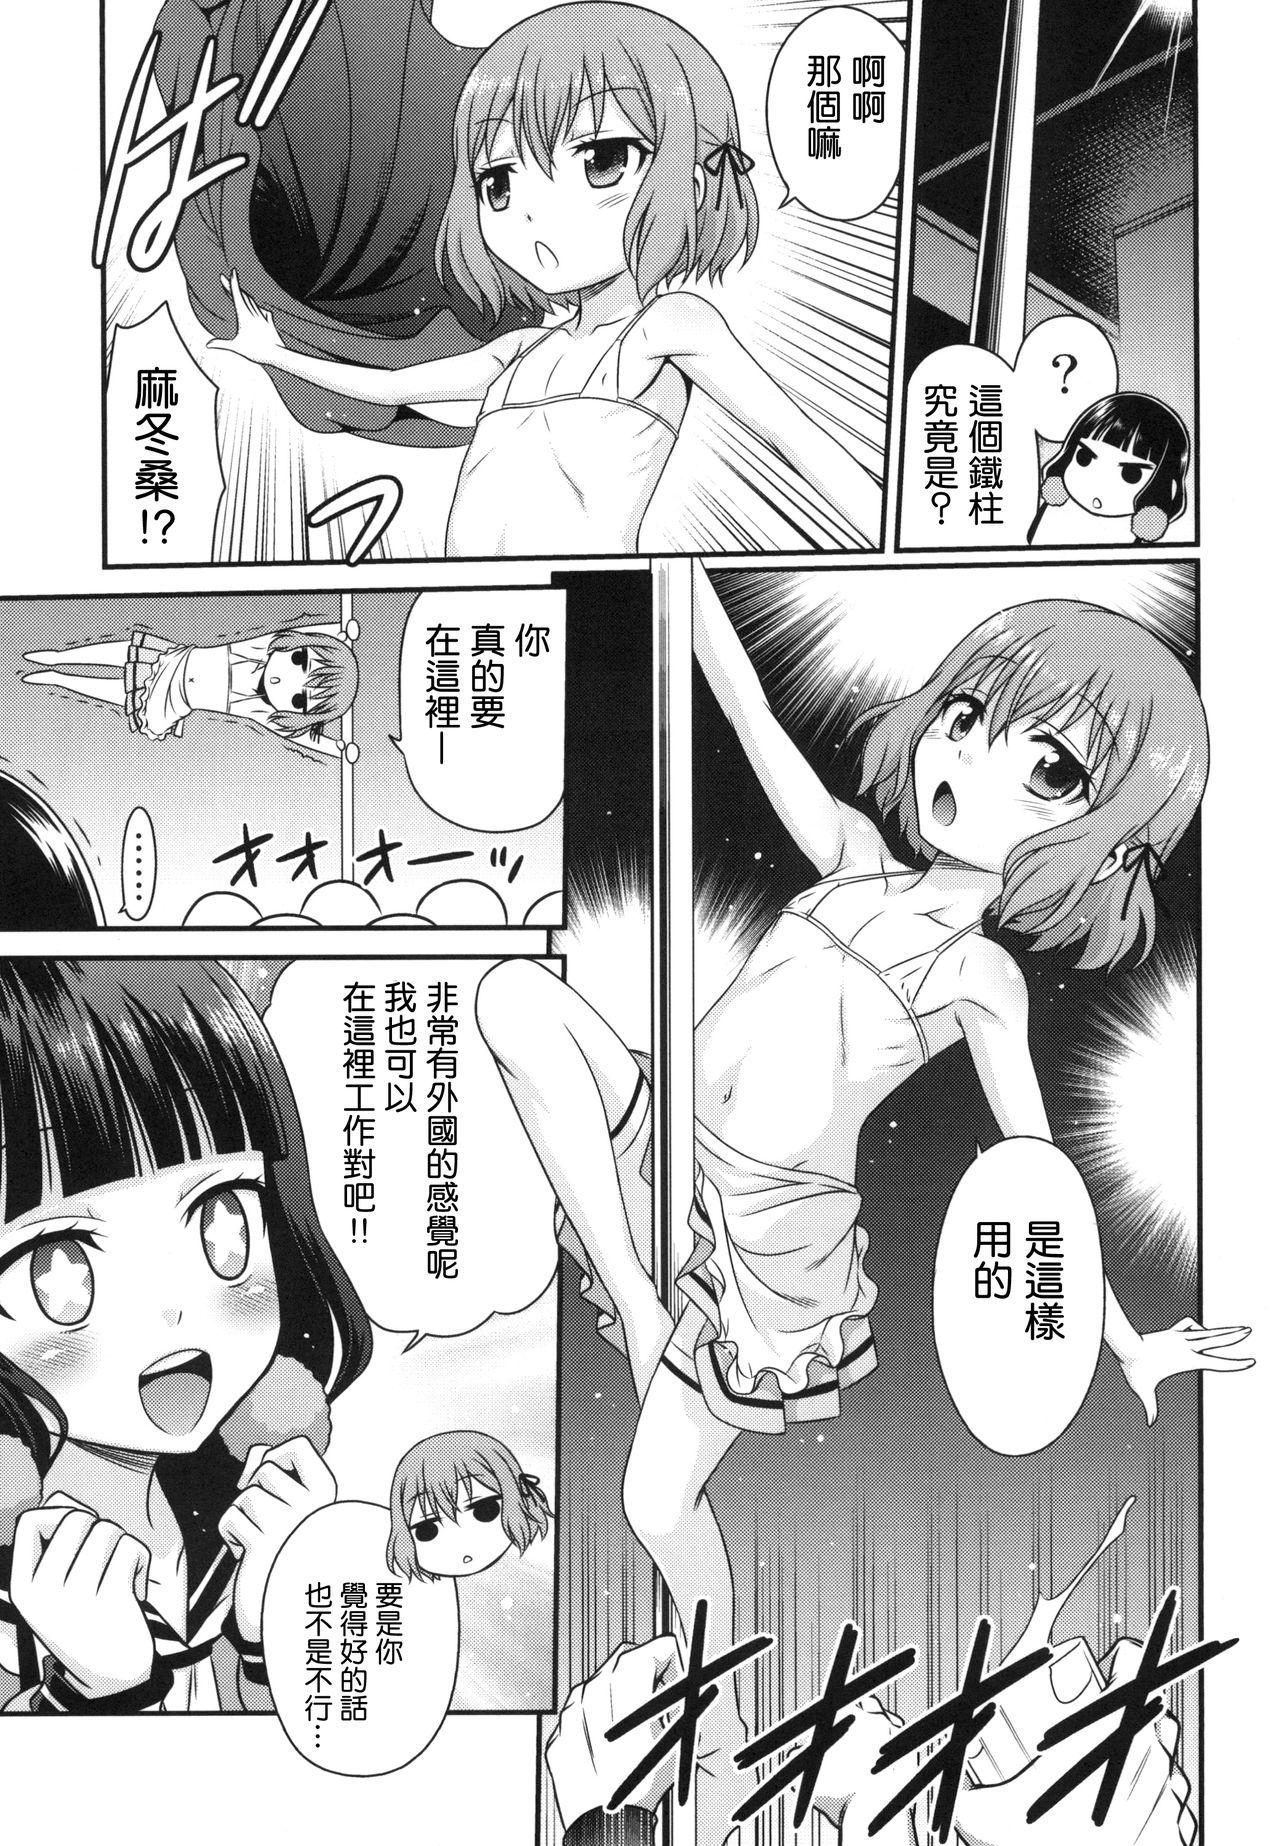 Pussy Licking YOU no Atsumaru Omise!! - Blend s Piercing - Page 6